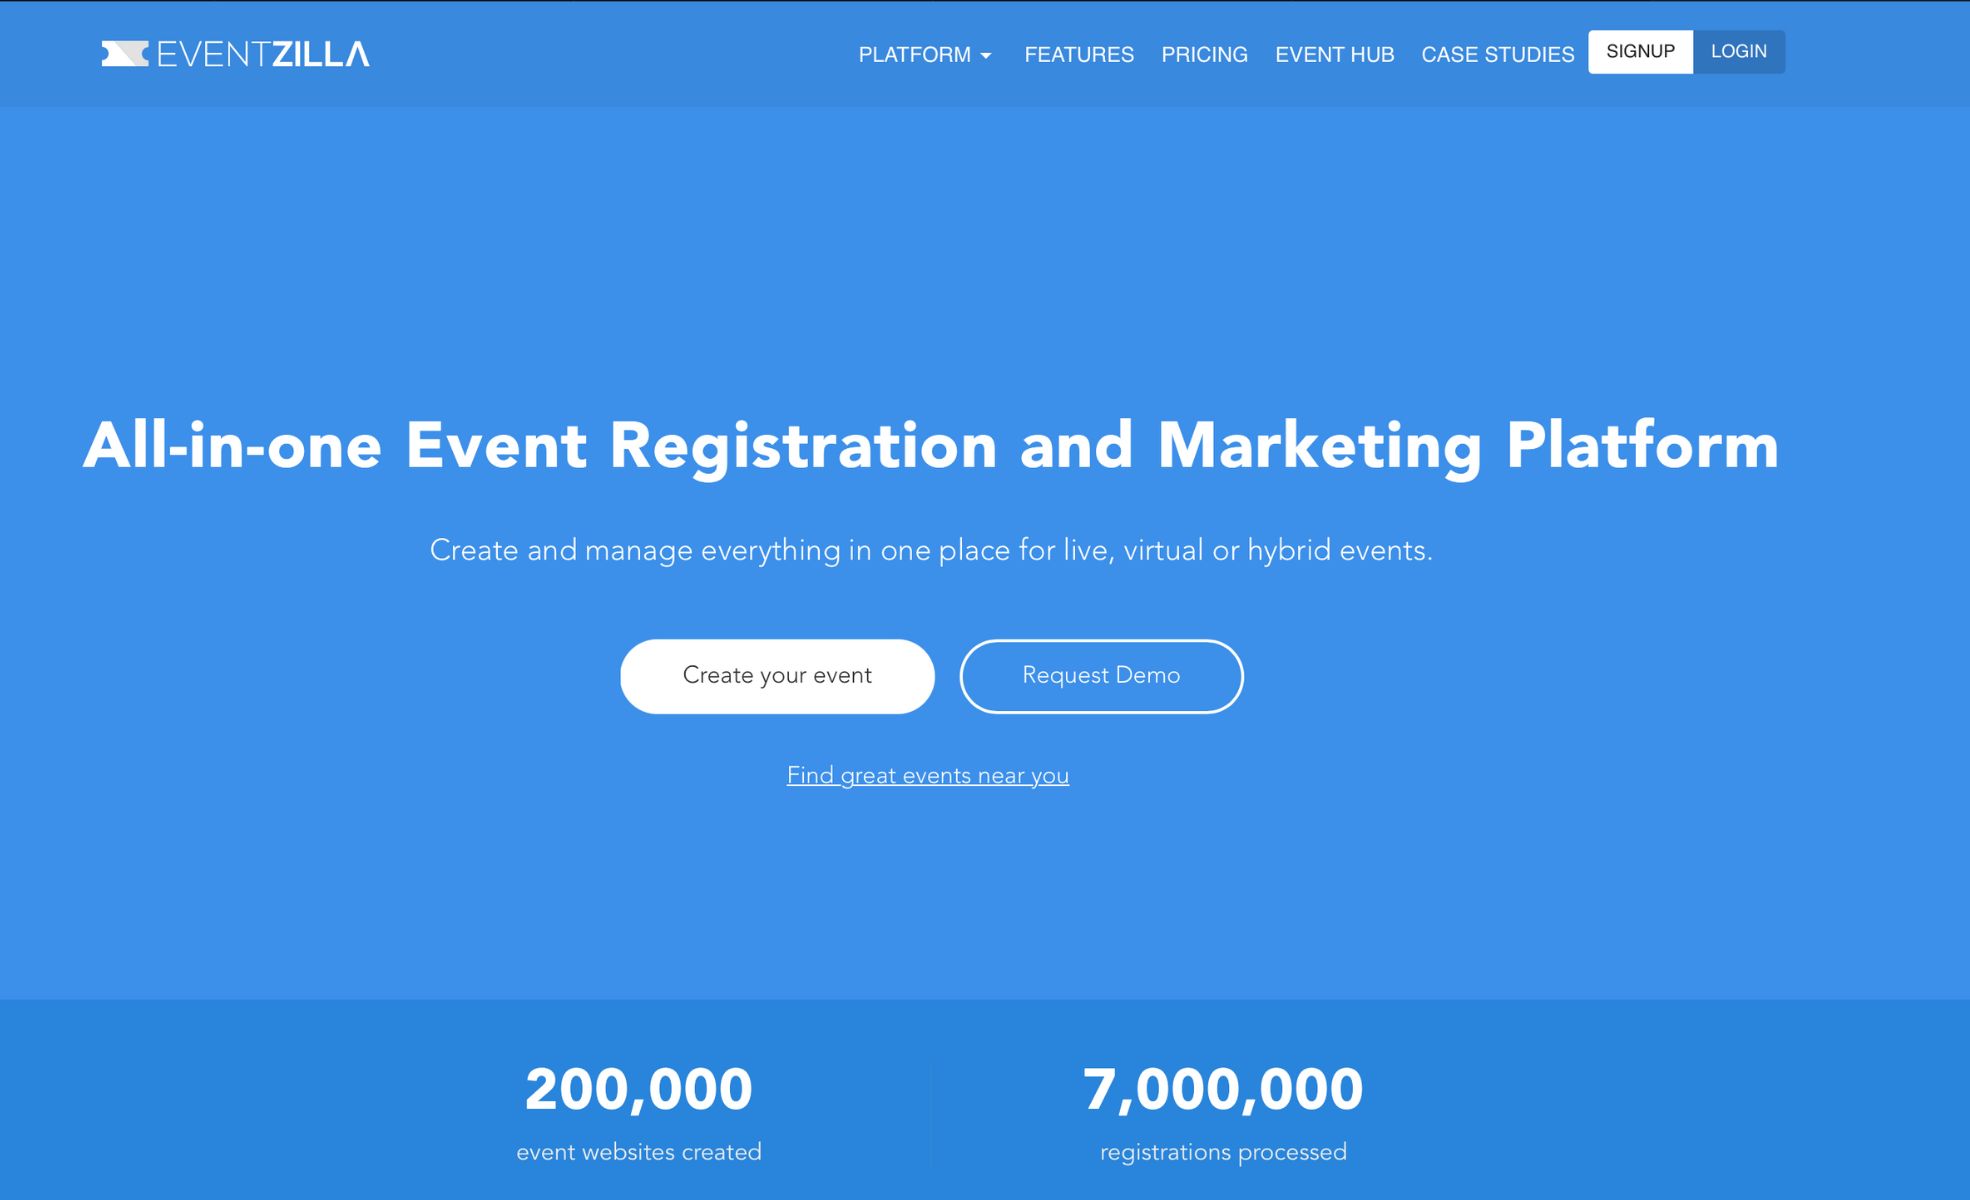 Screenshot Of Eventzilla Webpage For Selling Tickets To An Event